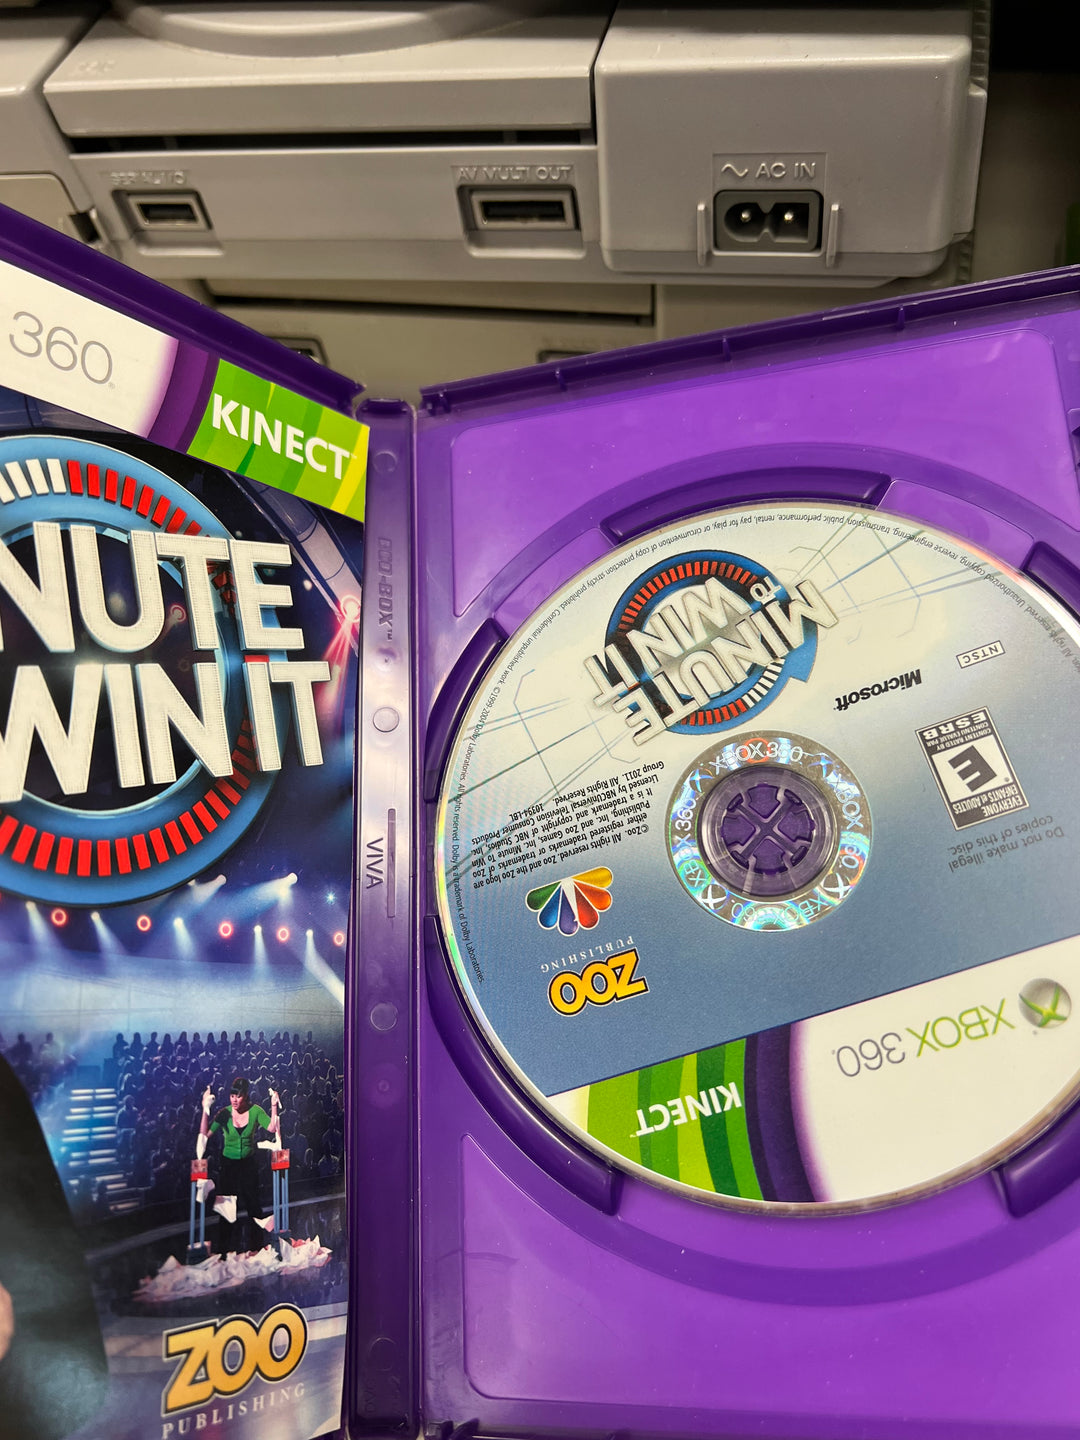 Minute to Win It for Microsoft Xbox 360 in case. Tested and working.     DO61024